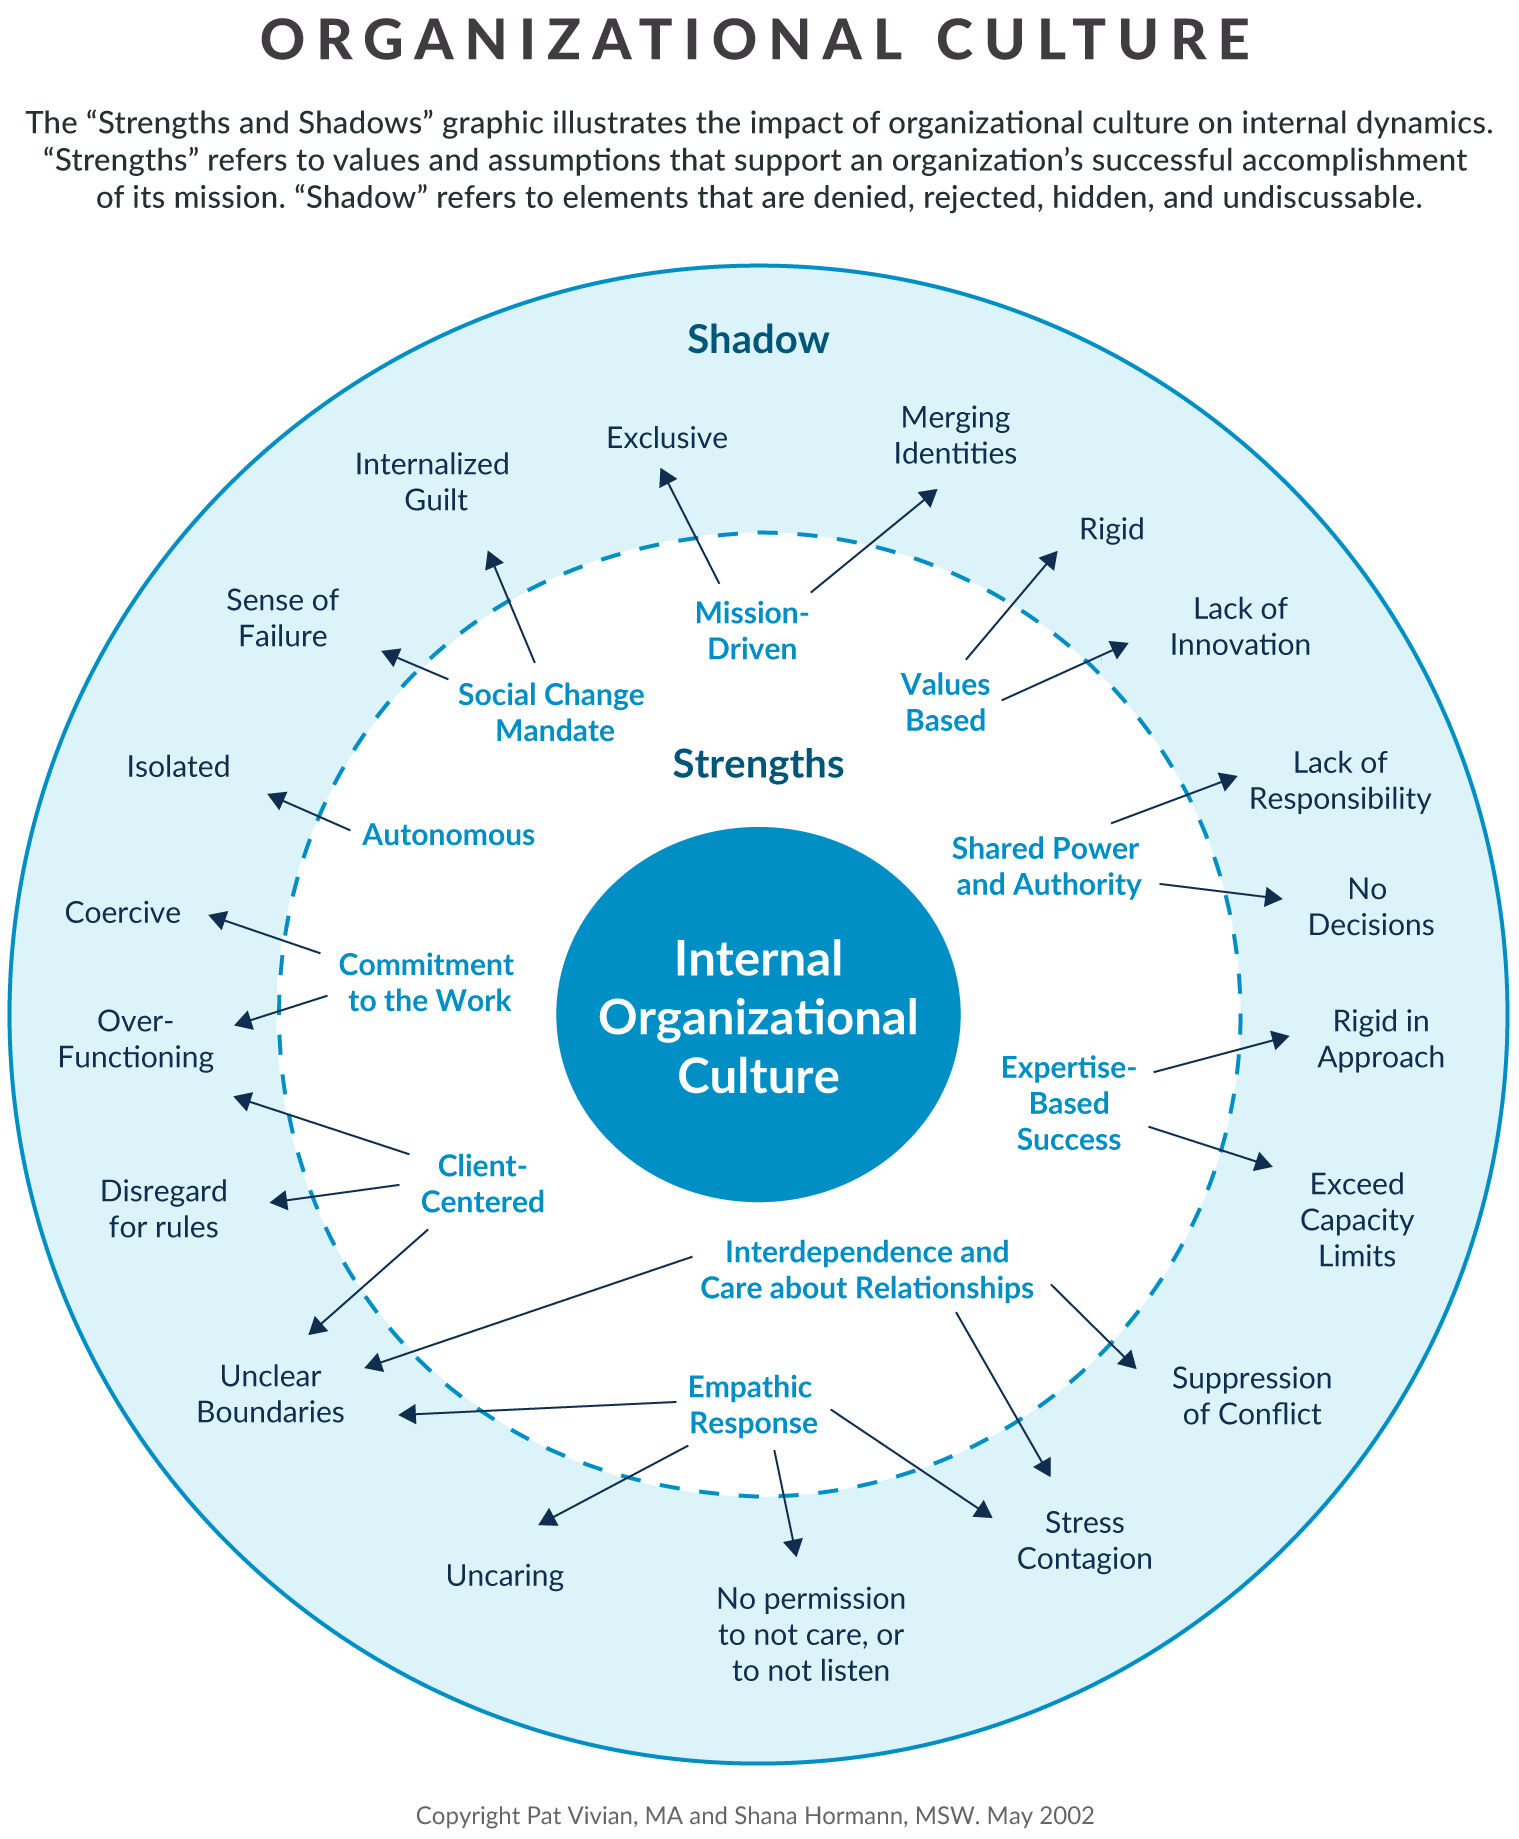 Strengths and Shadows of Organizational Culture Graphic 